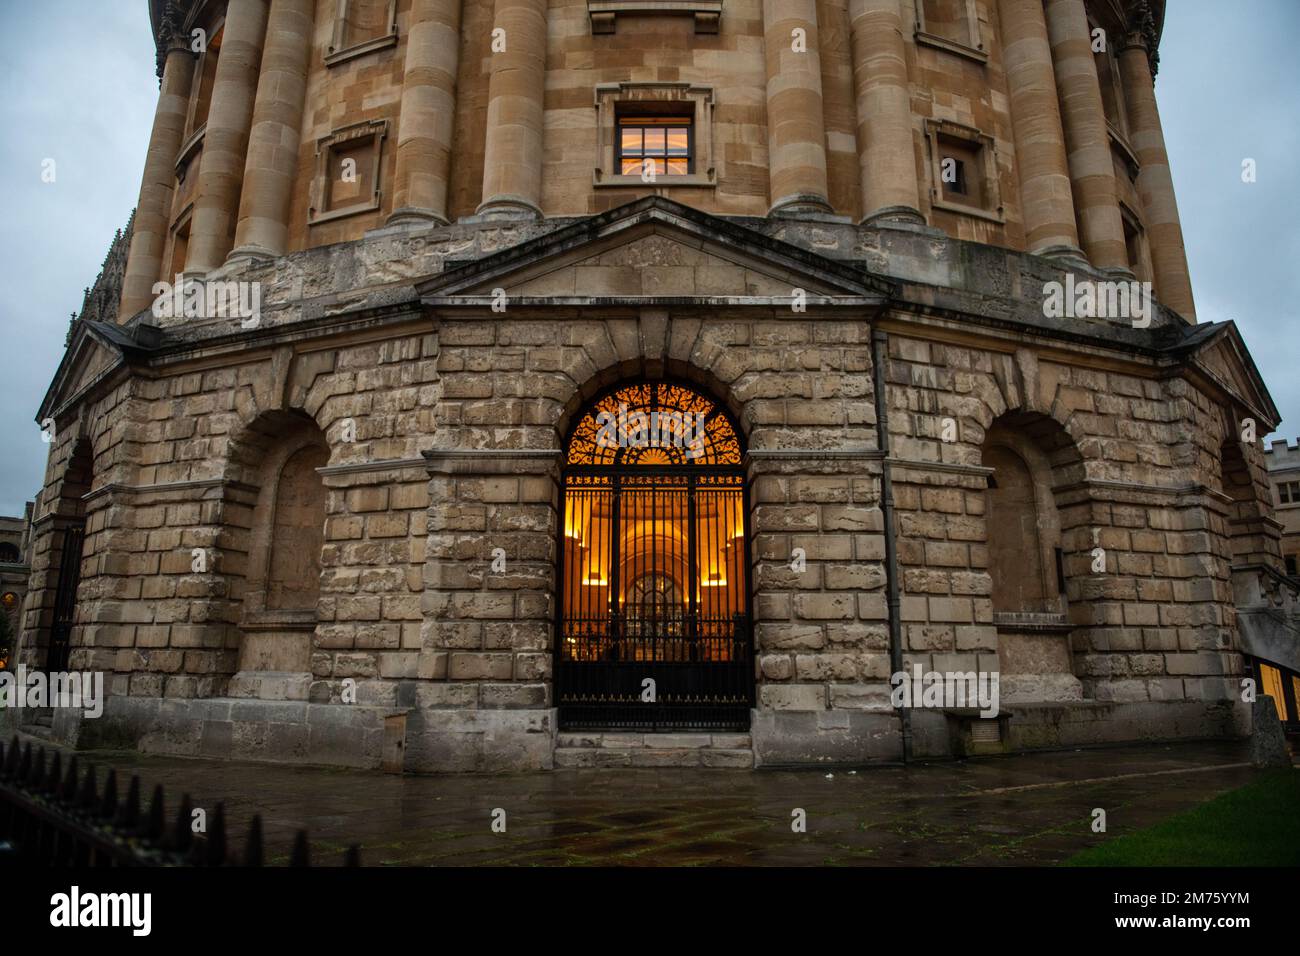 The Radcliffe Camera, a building of Oxford University, designed by James Gibbs in the neo-classical style. Stock Photo